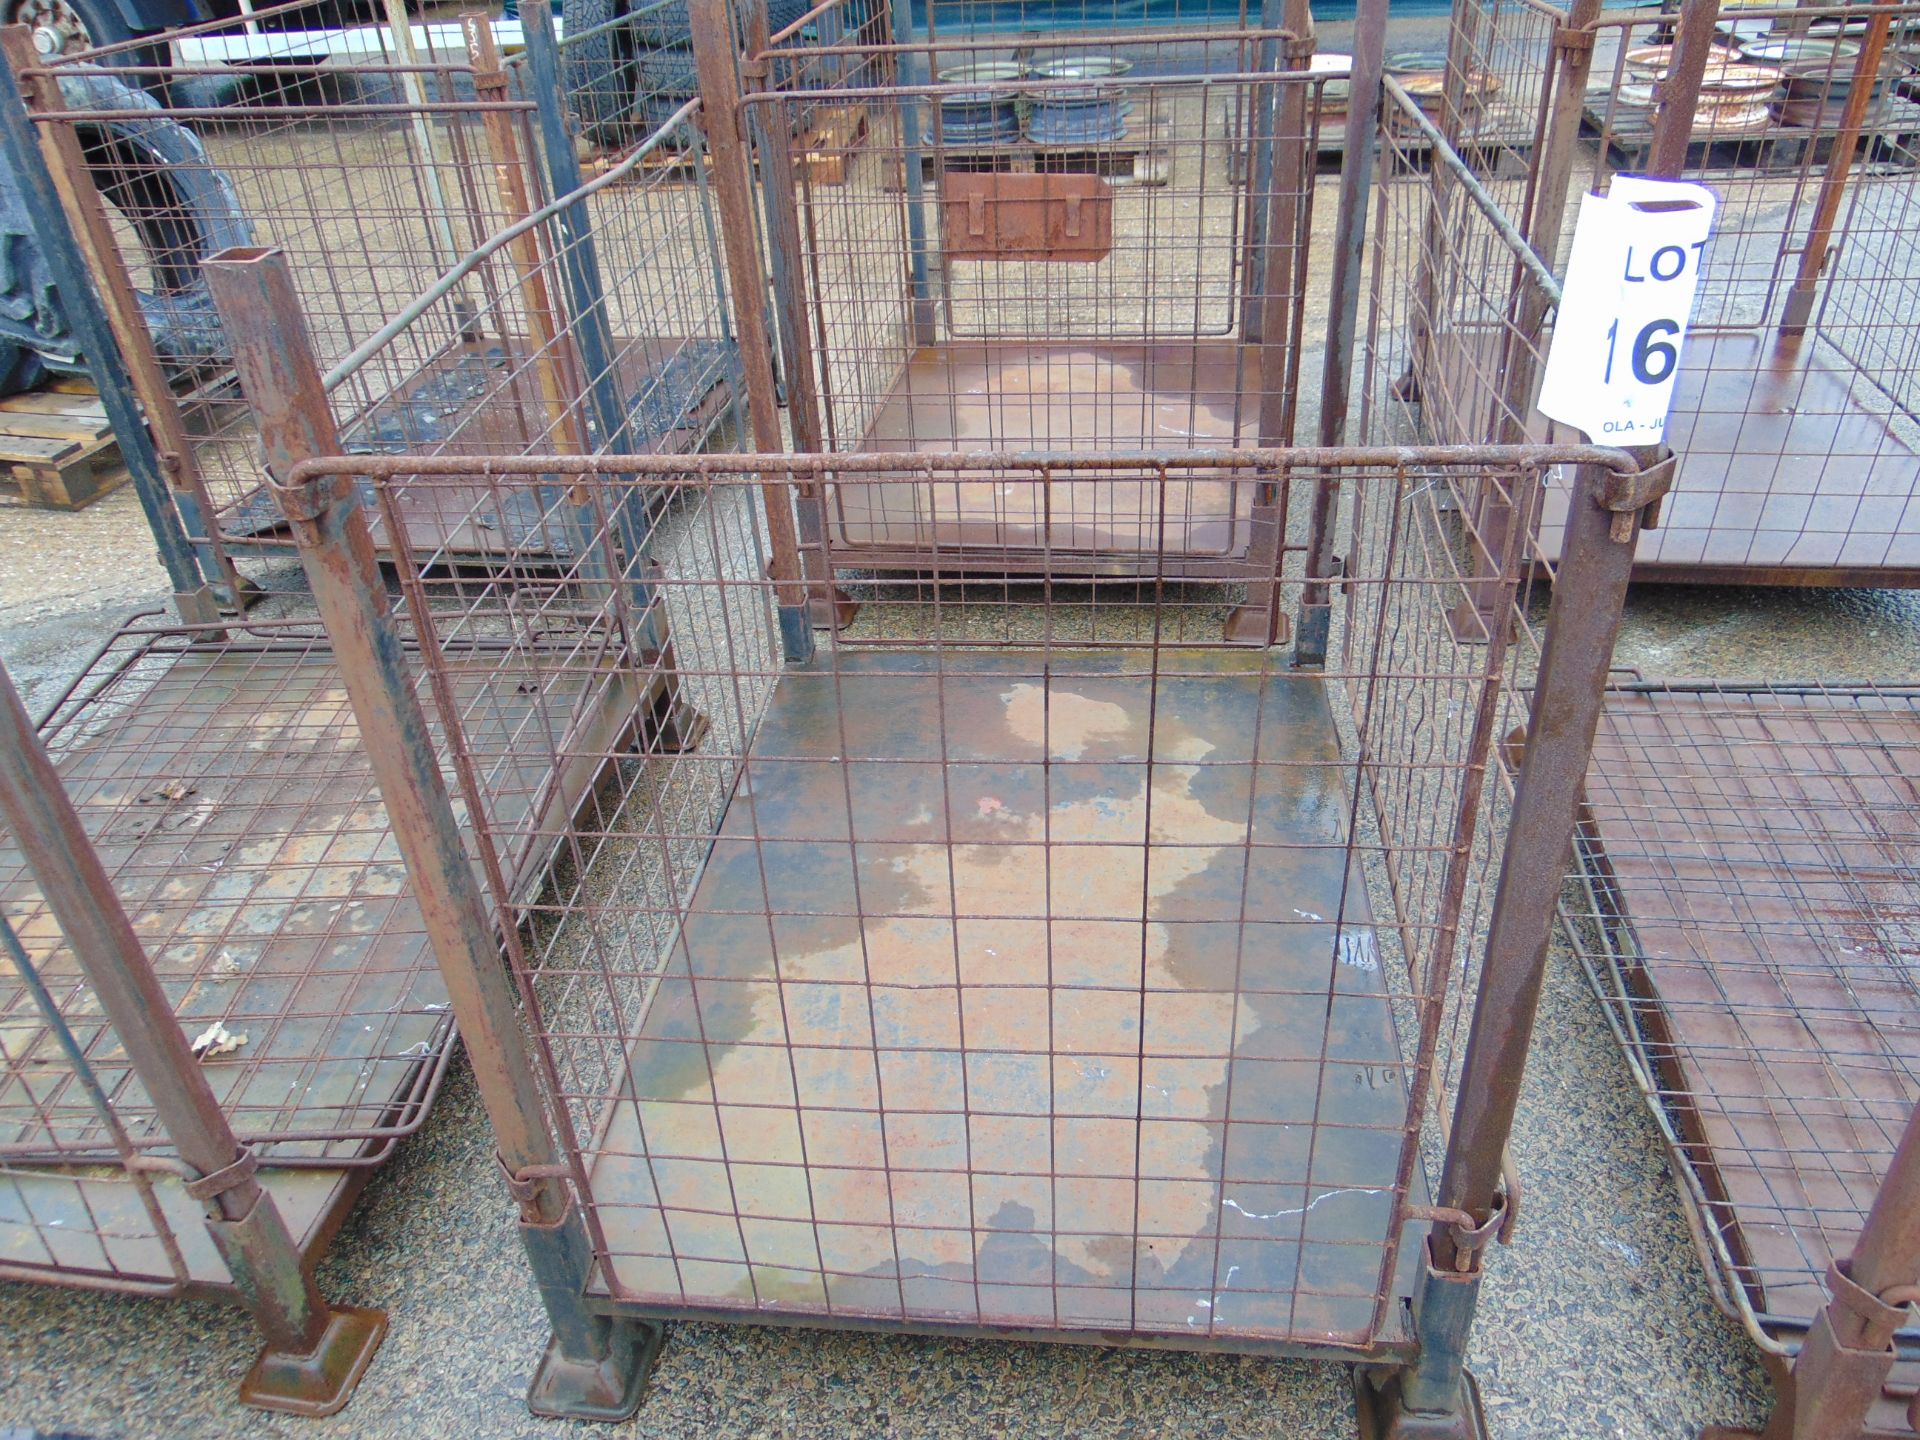 1 x STEEL STACKING STILLAGE, WITH REMOVABLE SIDES AND CORNER POSTS